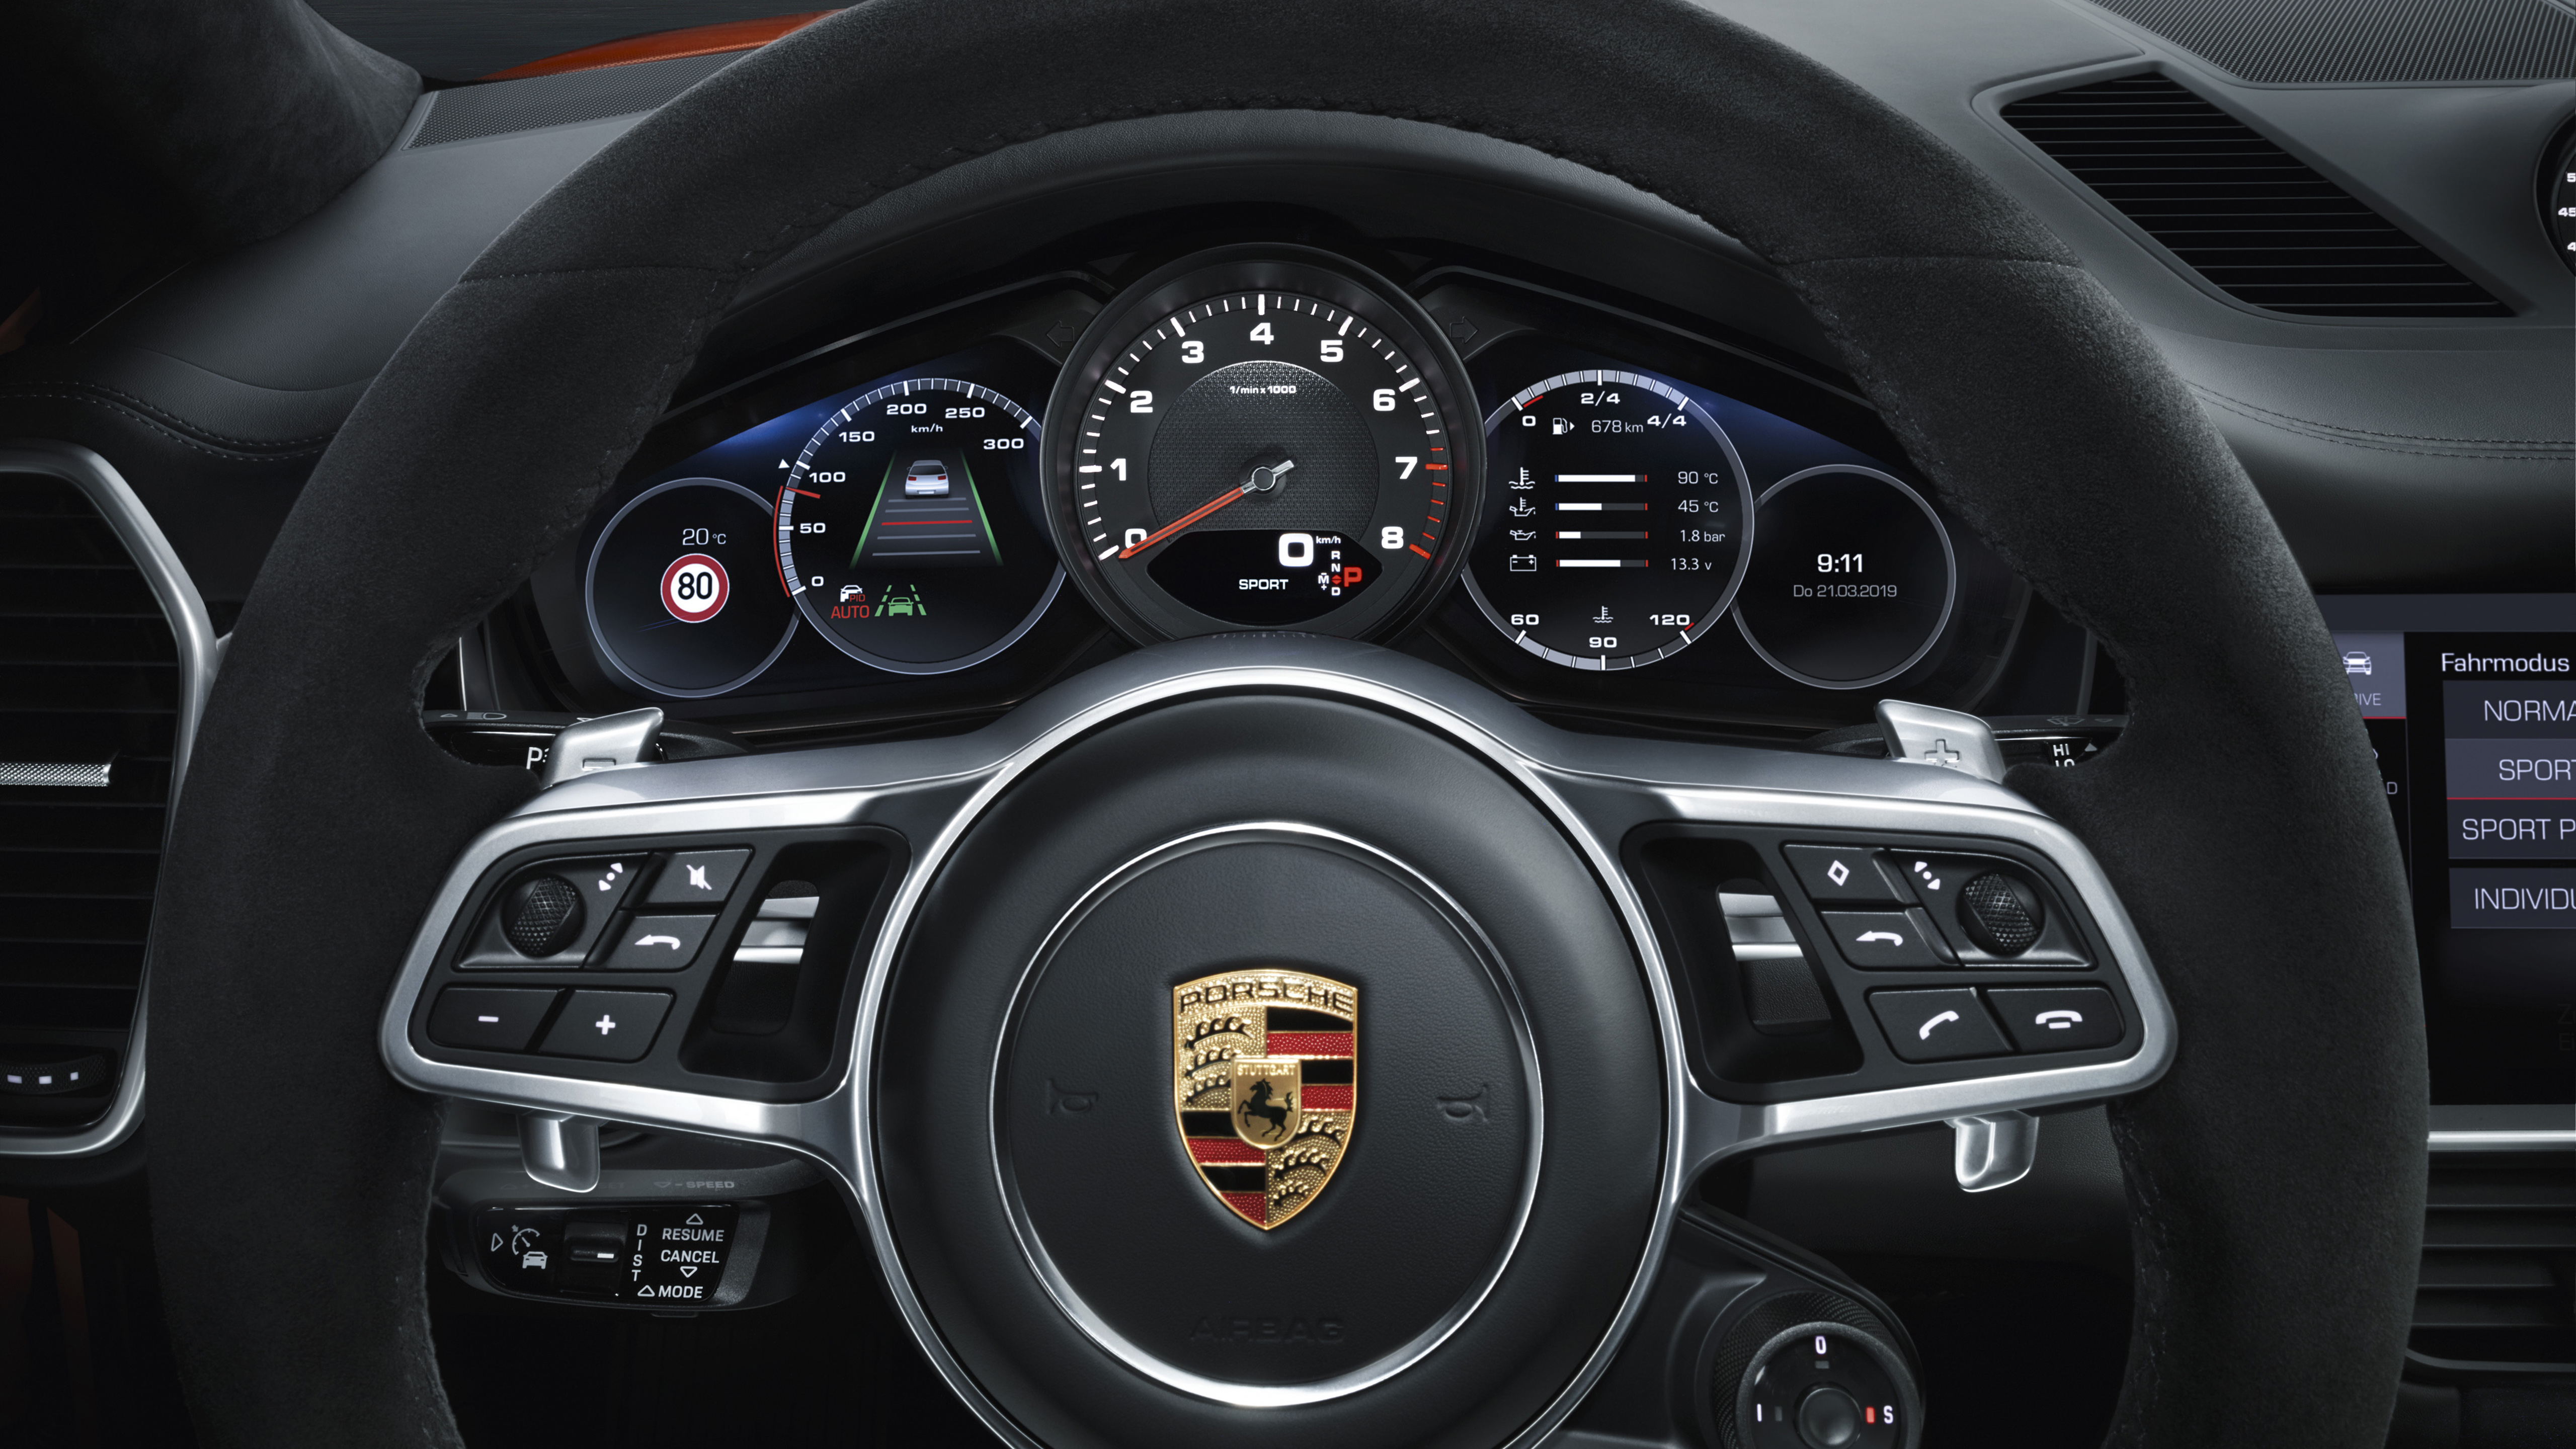 Porsche Cayenne Coupe 2019 Interior 4K Wallpapers | HD Wallpapers